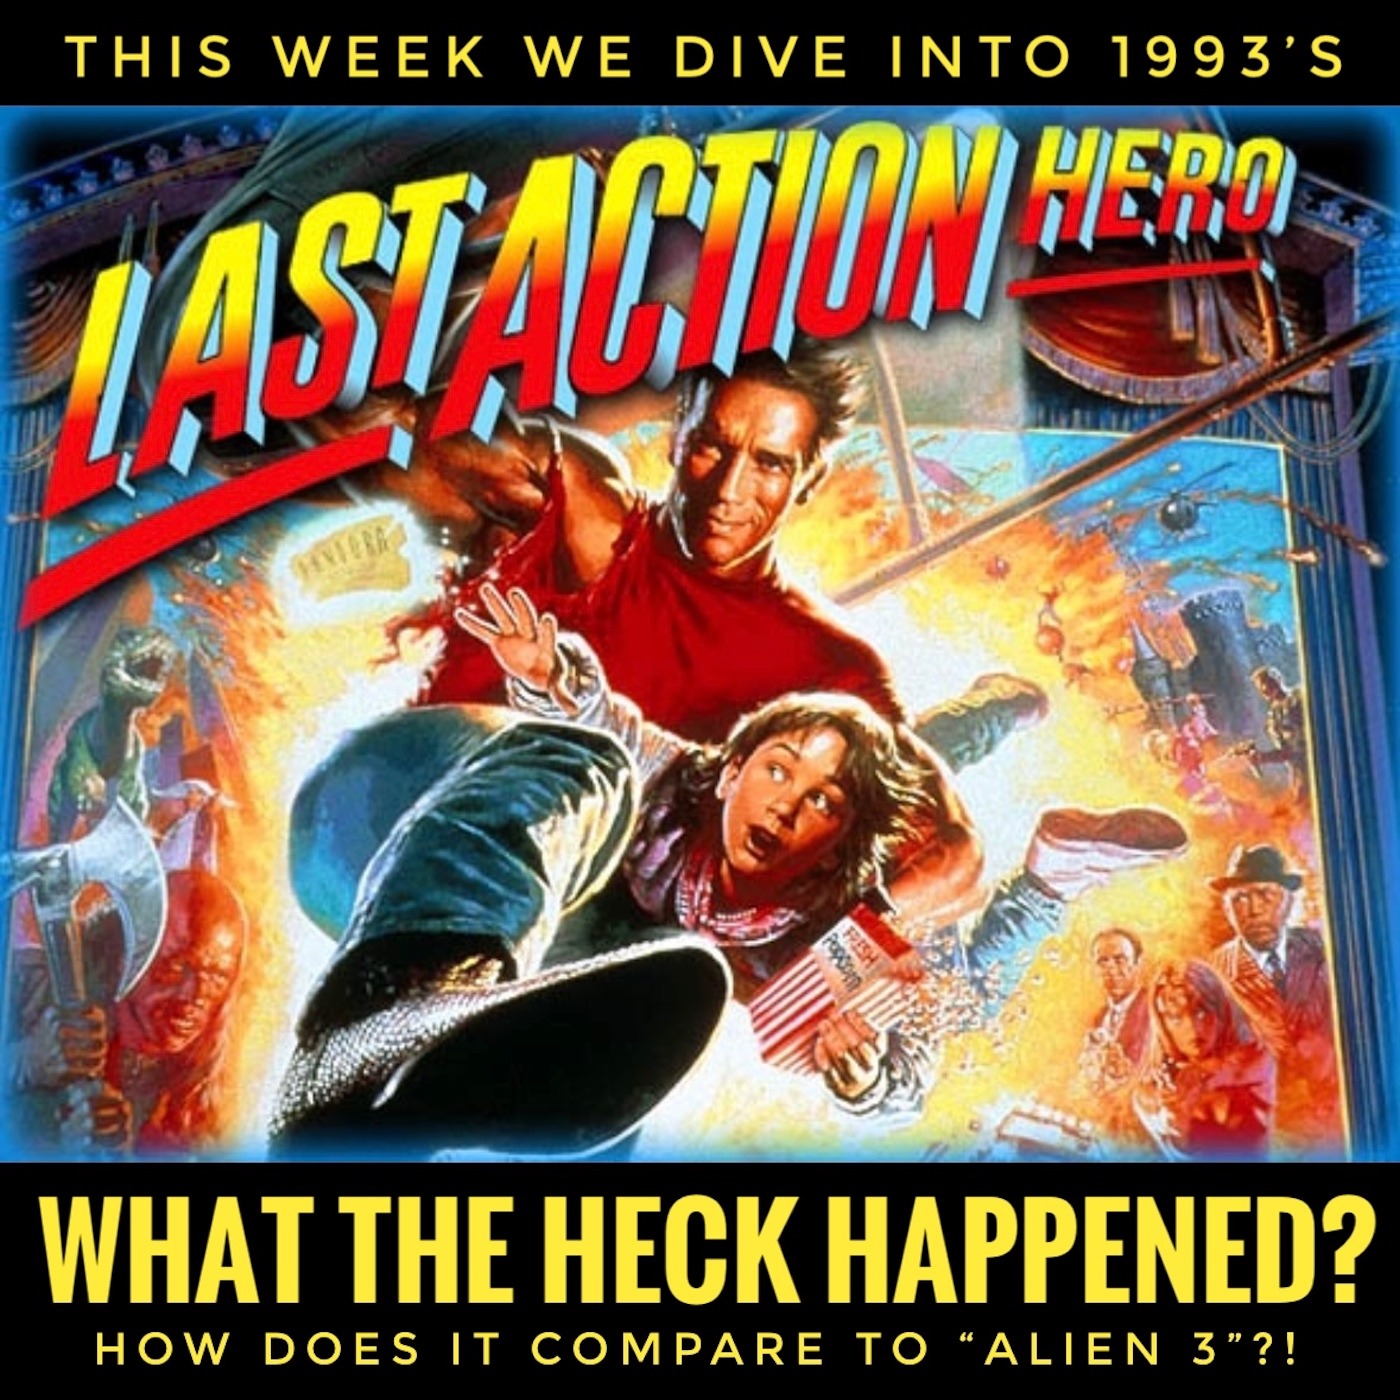 Last Action Hero (1993): What the Heck Happened?!